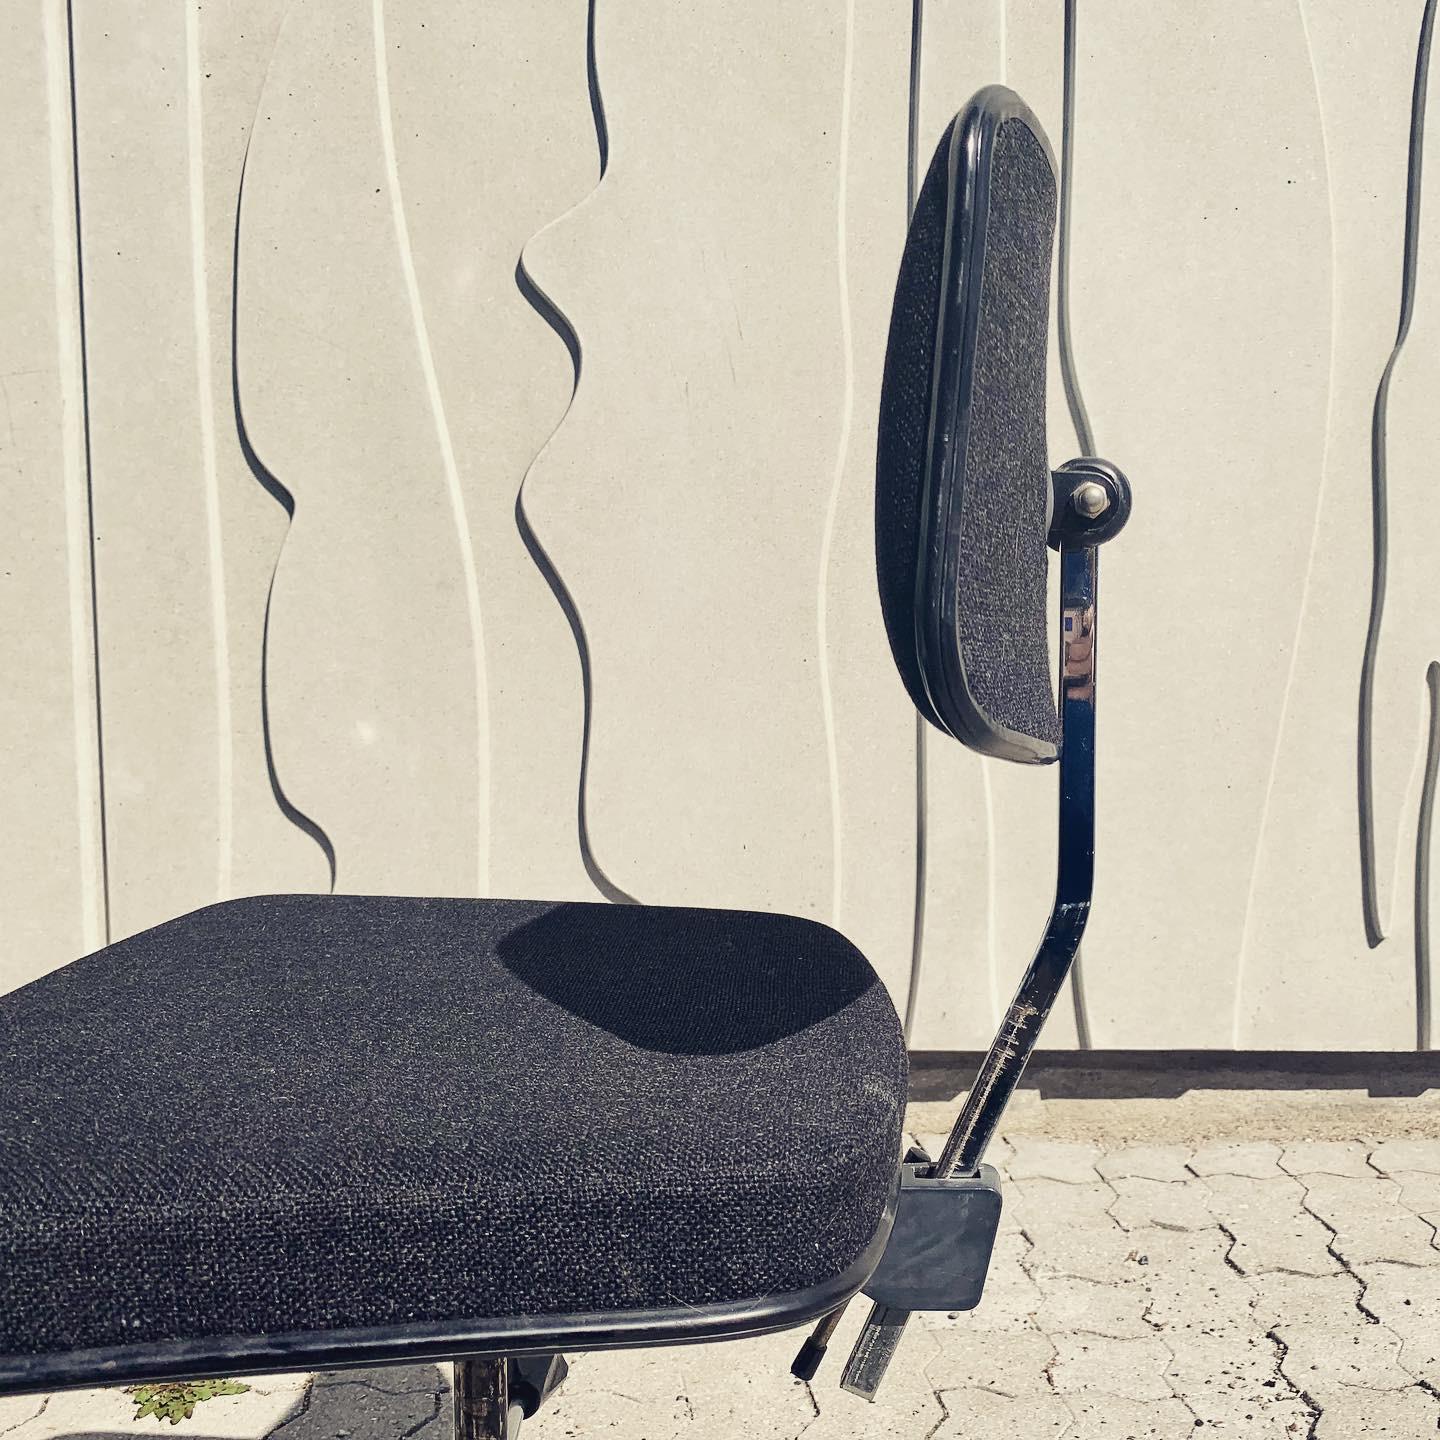 The swivelling desk chair was designed by Jorgen Rasmussen, 1950s Denmark
and manufactured by Labofa.
The seat is adjustable from up to down and features a swivelling function also the backrest is adjustable from up to down. The chair was made of